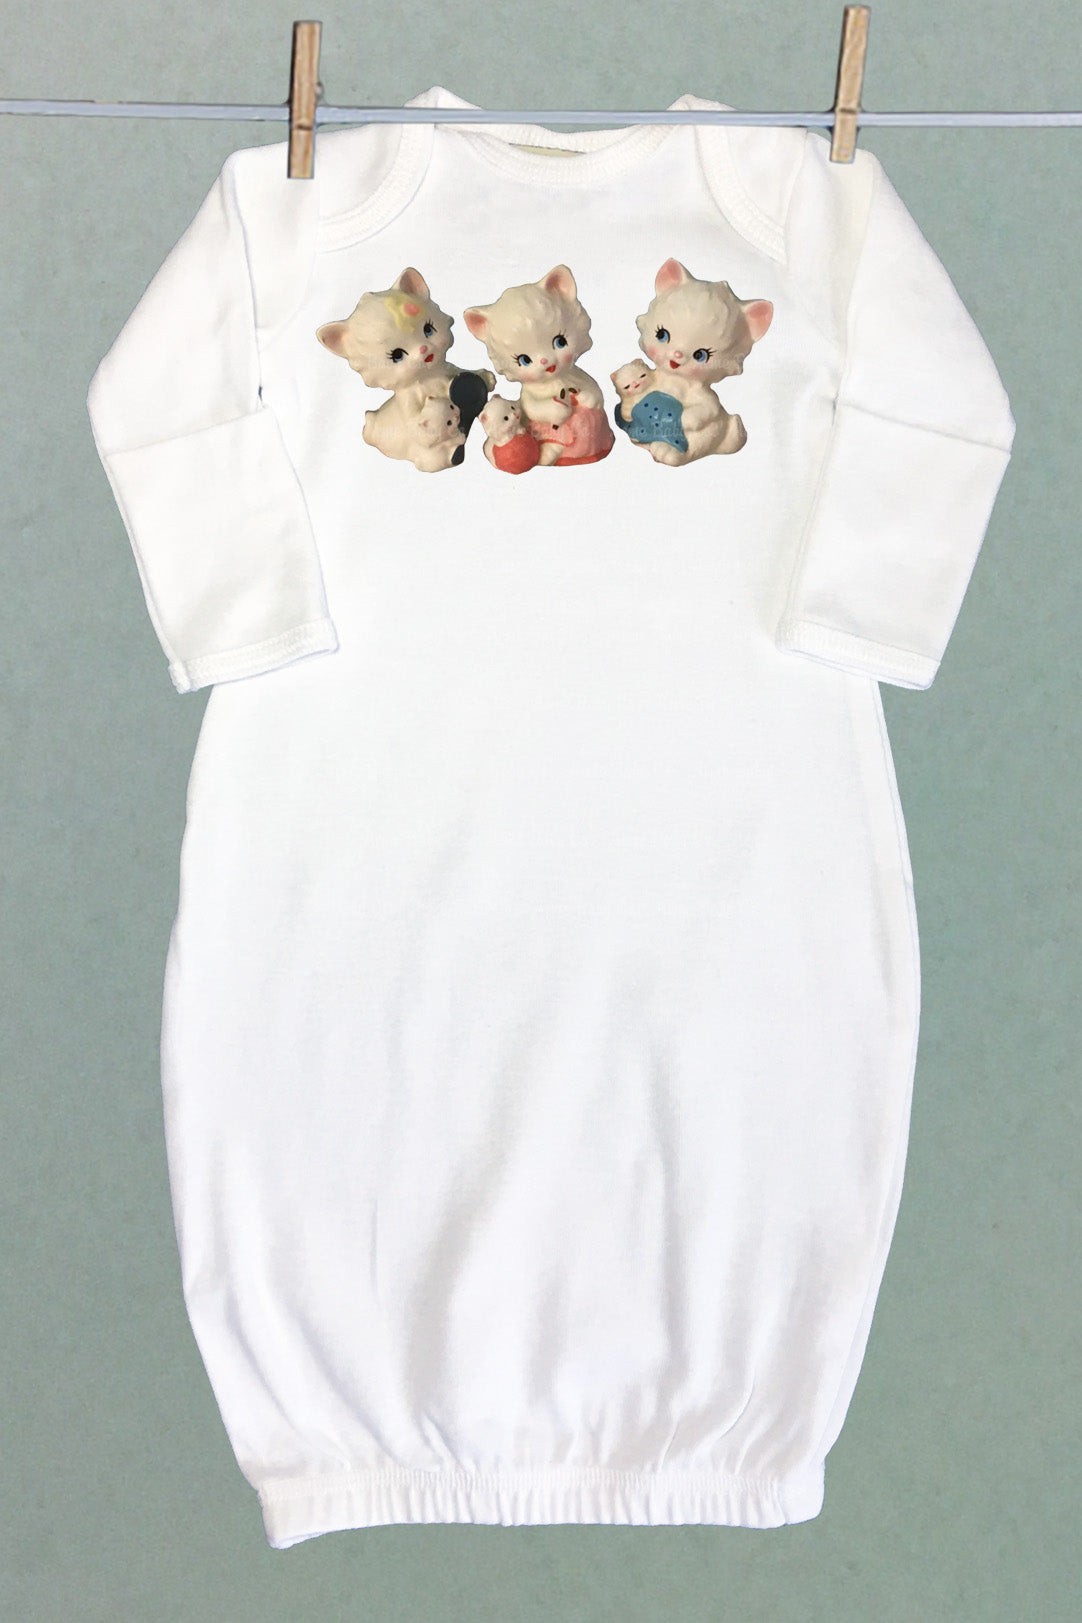 Knitting Kittens Baby Sacque Gown